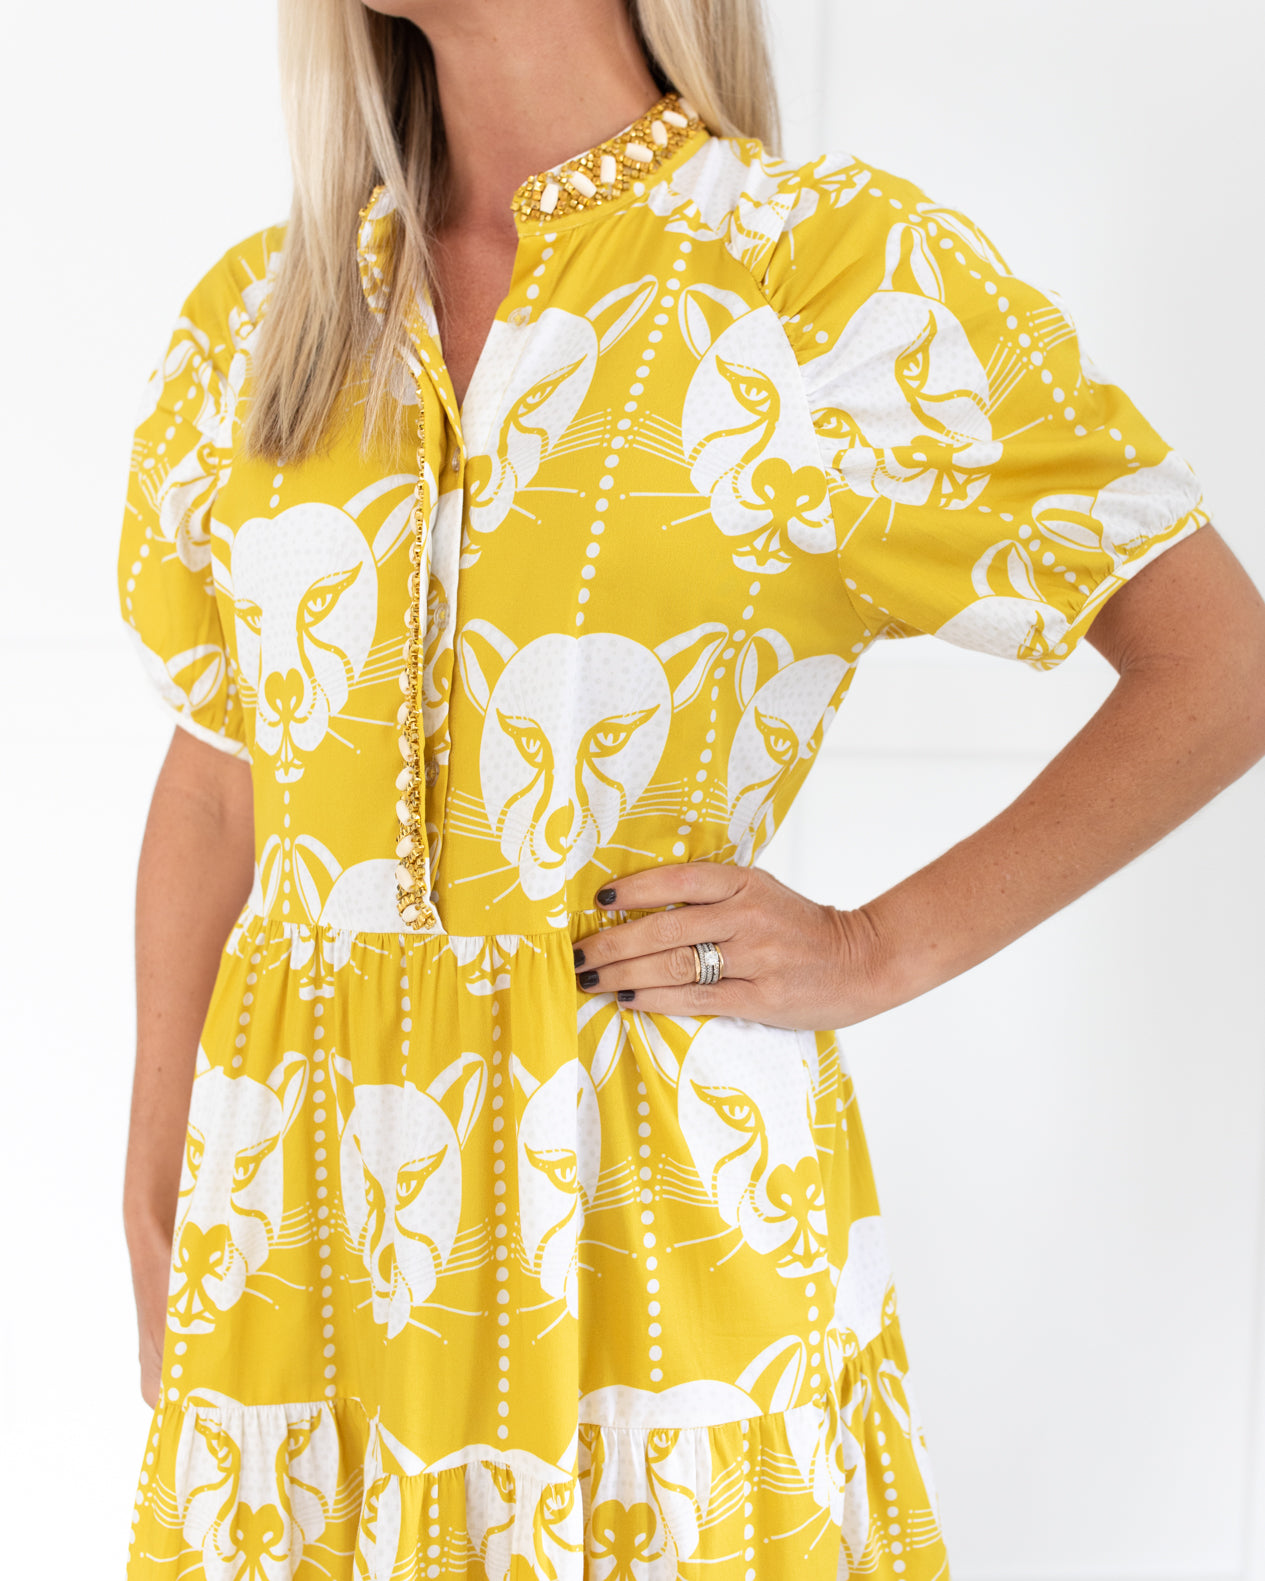 Kimbell Dress in Saffron Jungle Cat by SHERIDAN FRENCH